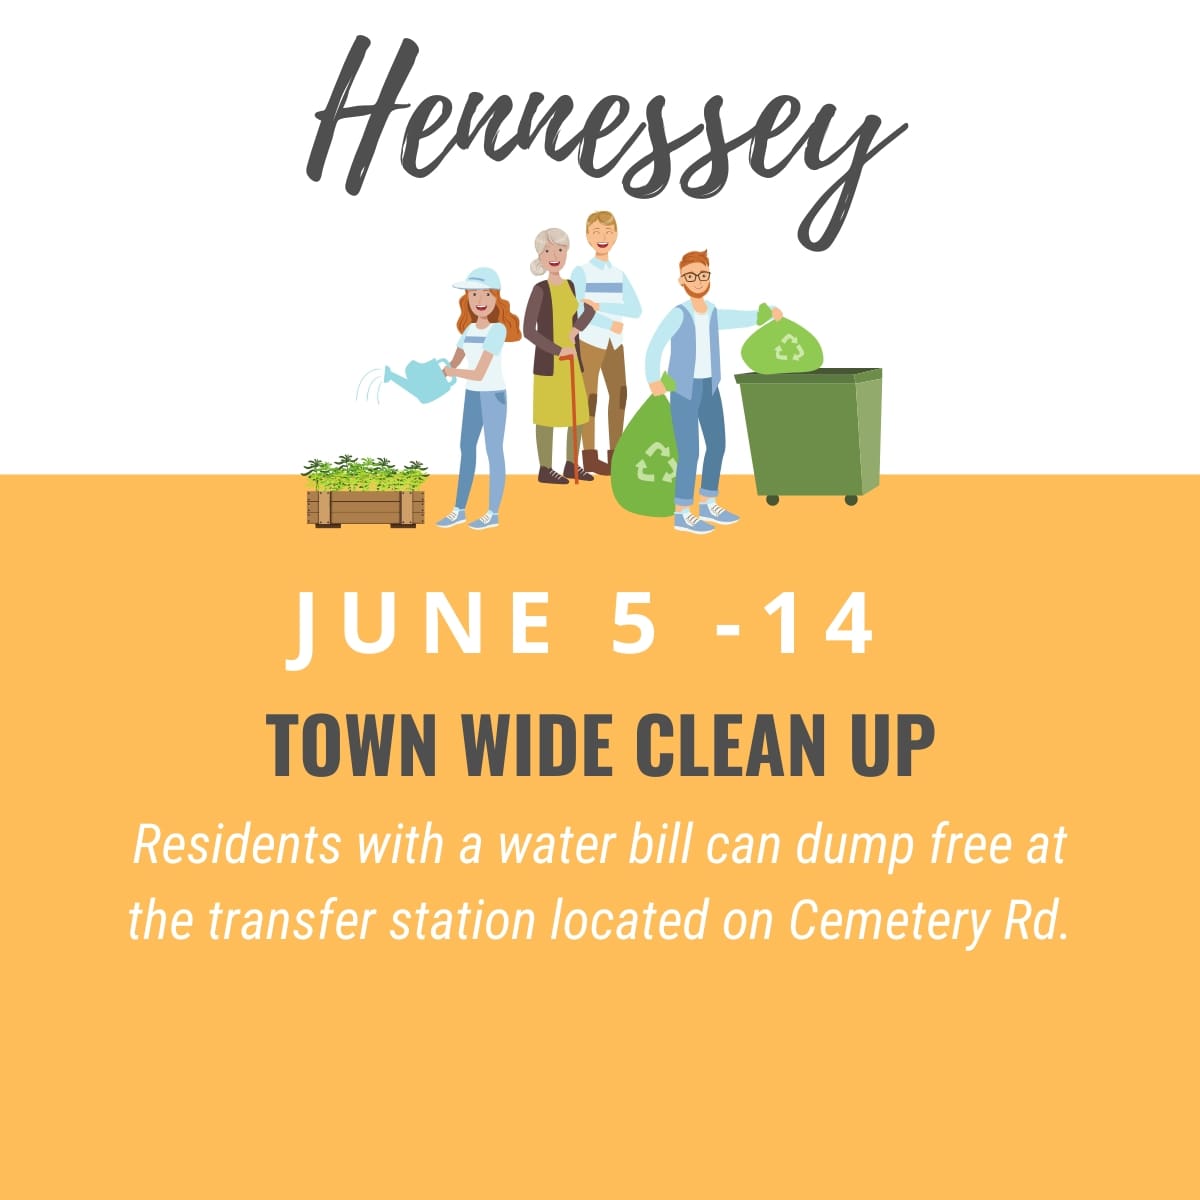 TOWN WIDE CLEAN UP